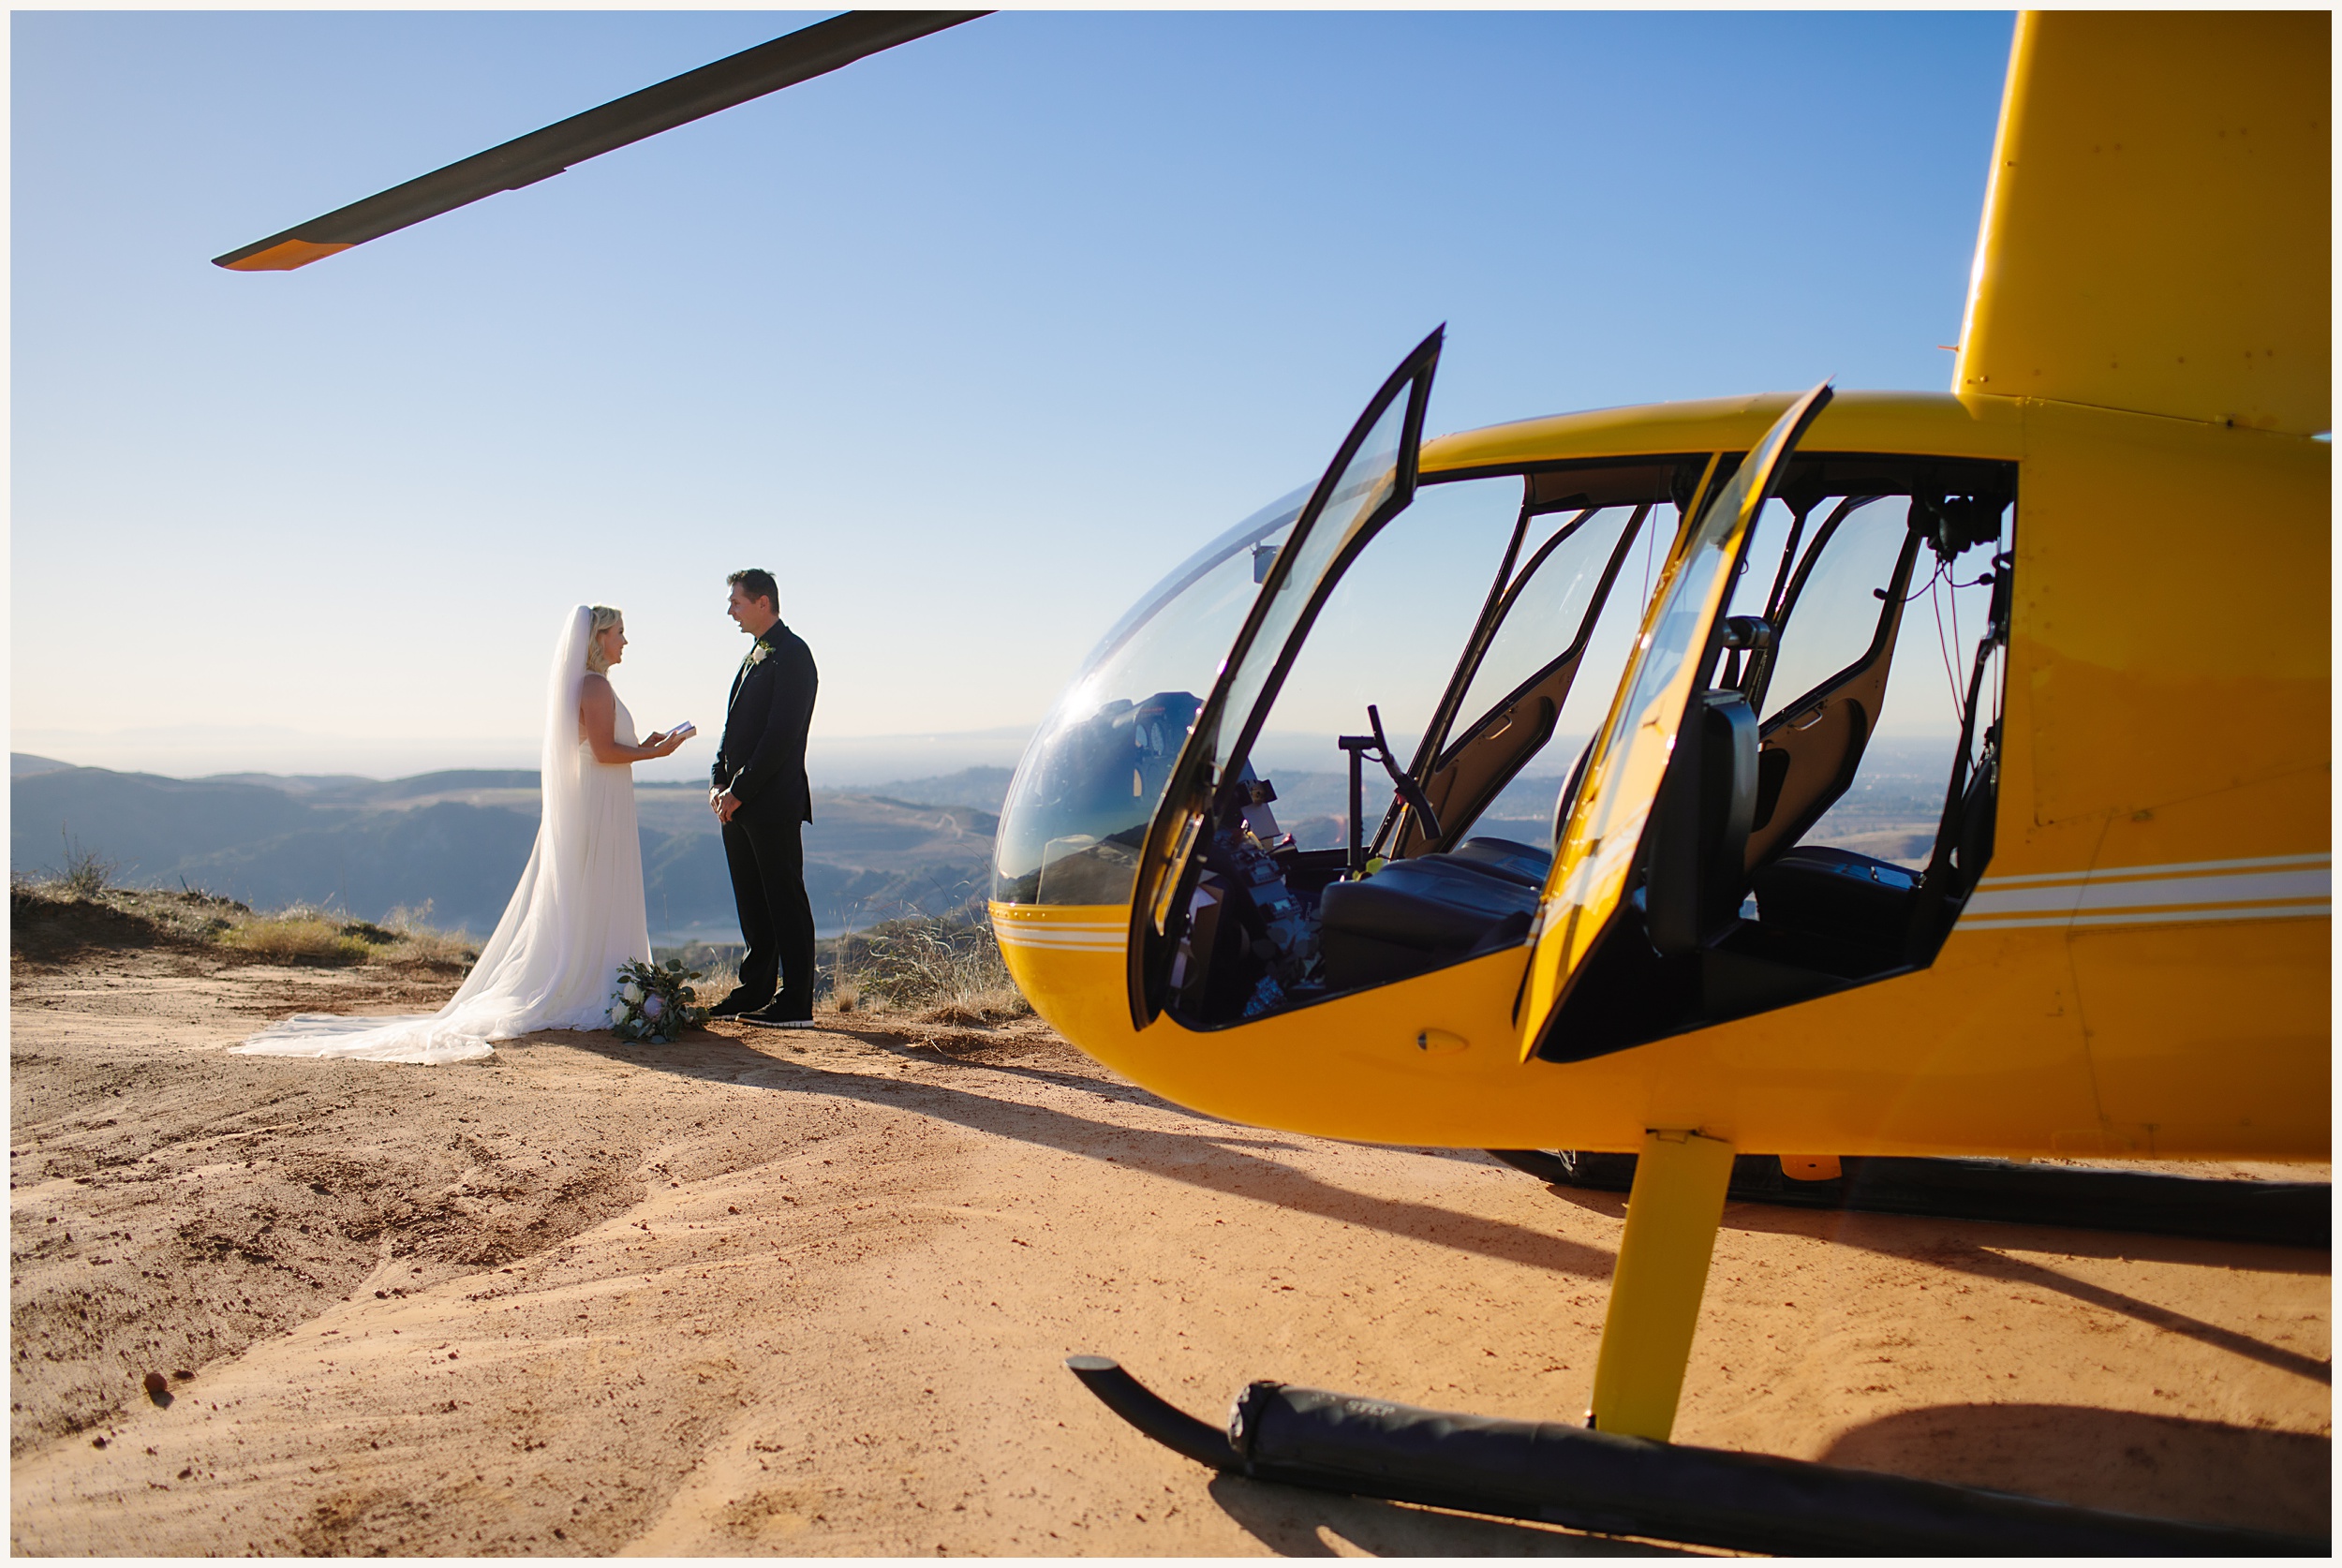 Catalina-Island-Elopement-Catalina-Island-Elopement-Photographer-adventure-elopement_0203 Catalina Island Elopement | Your 2022 Guide